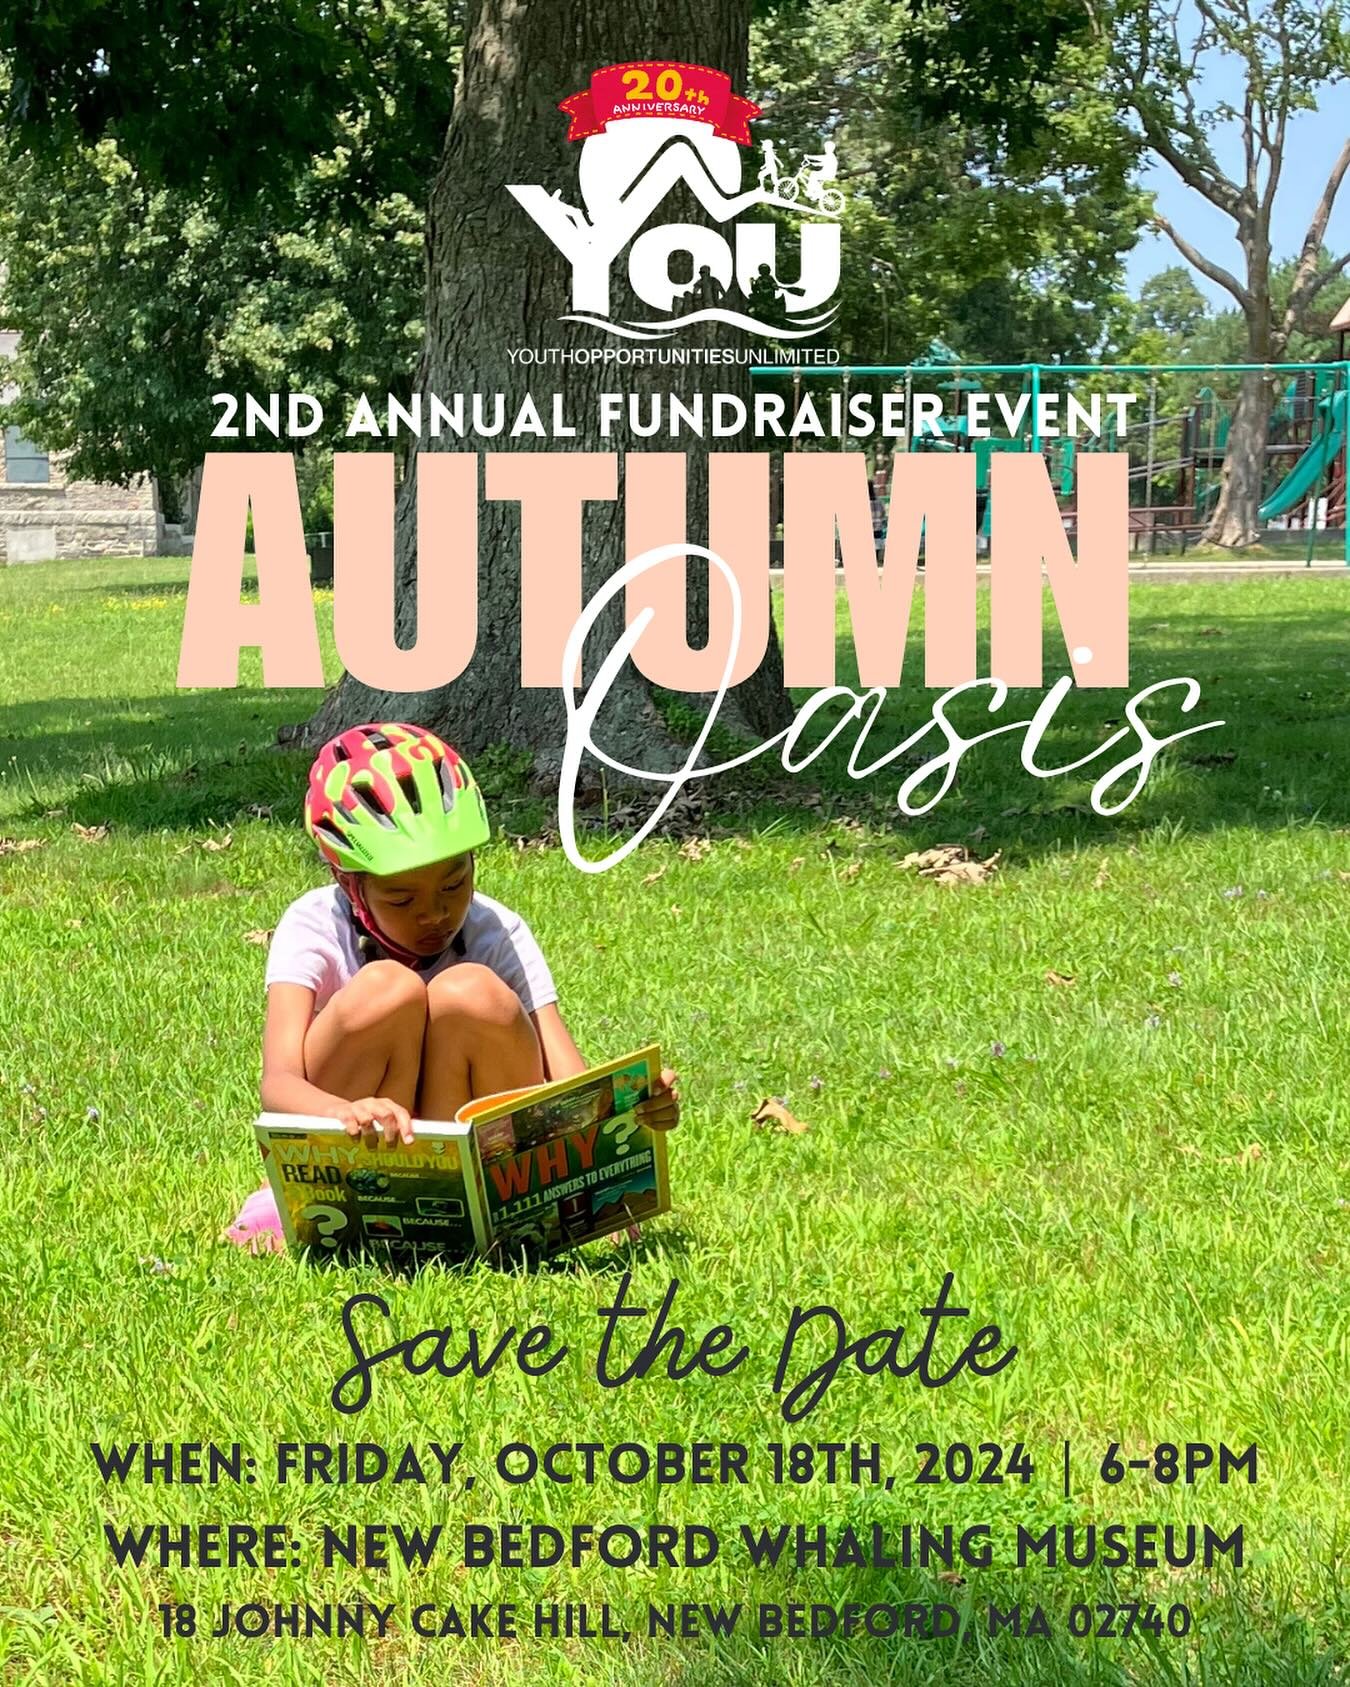 🎉 Join us in celebrating 20 incredible years of Y.O.U. at our 2nd annual Autumn Oasis Fundraiser event! 🎈 

🗓️Save the date: Friday, October 18th, 2024, 6:00pm-8:00pm. Get ready for an unforgettable evening as we reflect on our journey, celebrate 